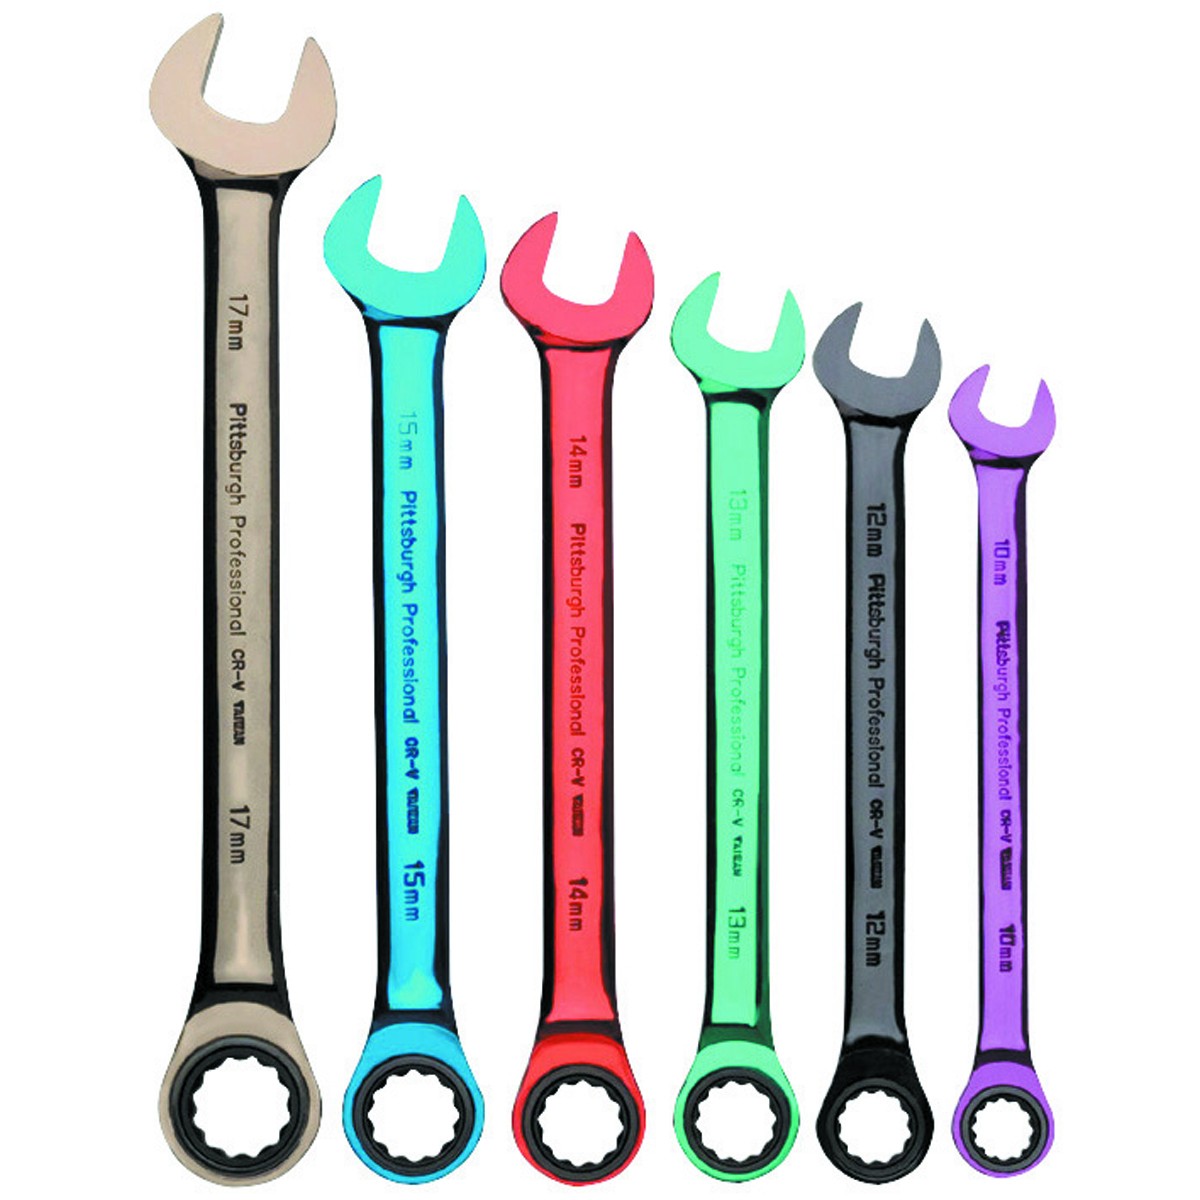 6 Pc Metric Color Combination Ratcheting Wrench Set